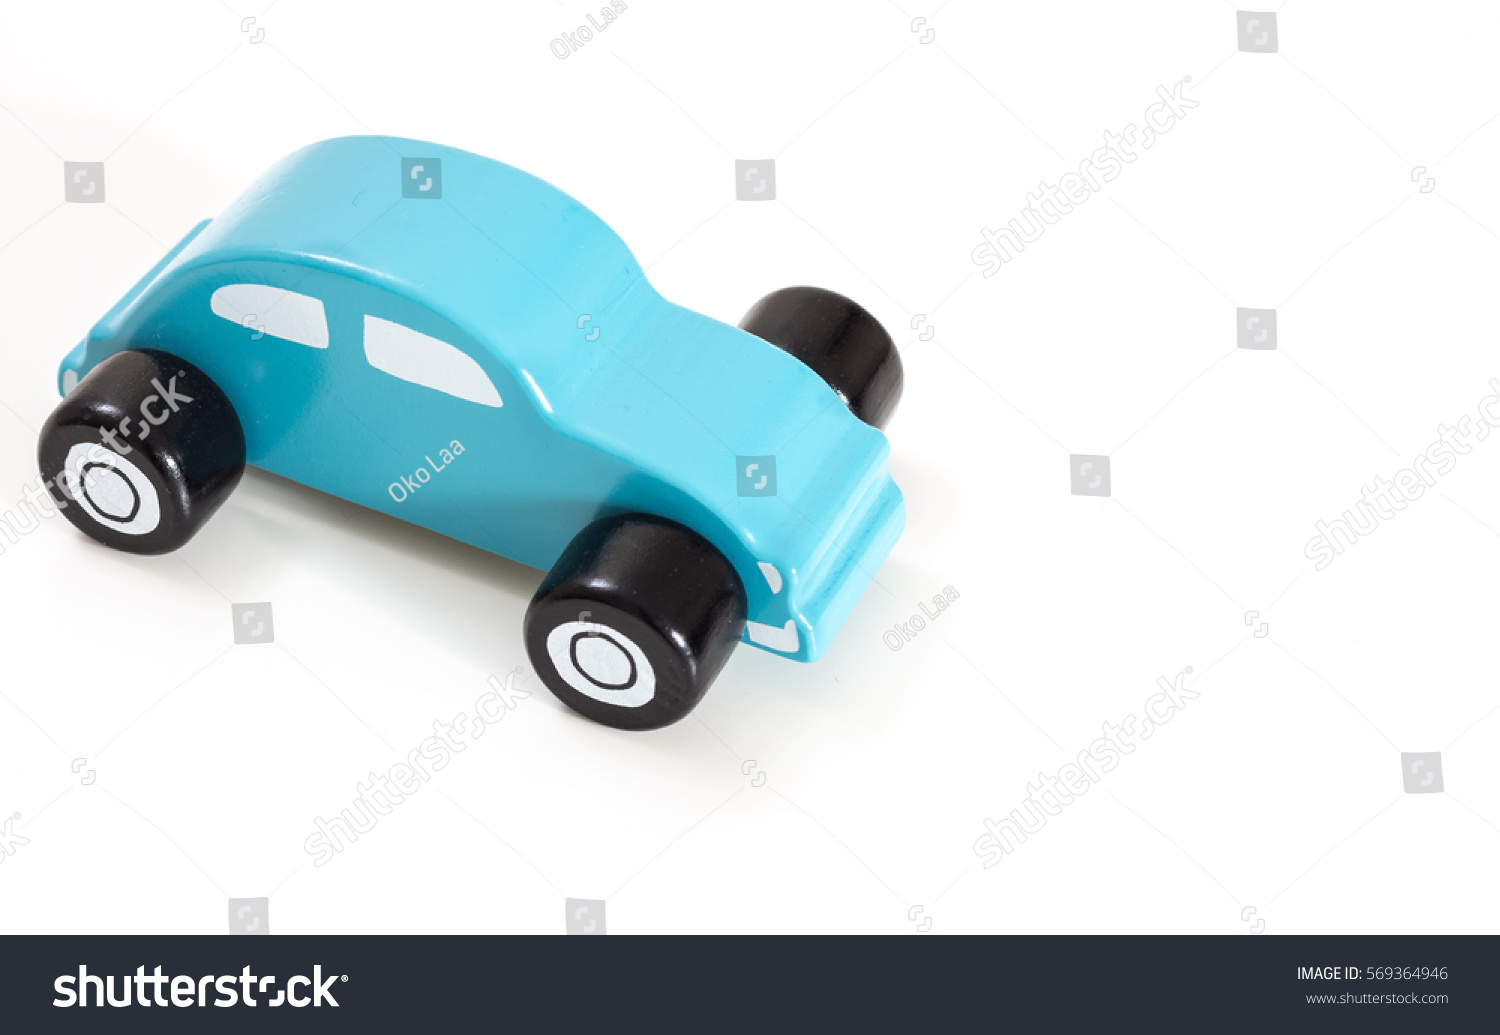 A blue toy car, on white background with copy-space. #569364946